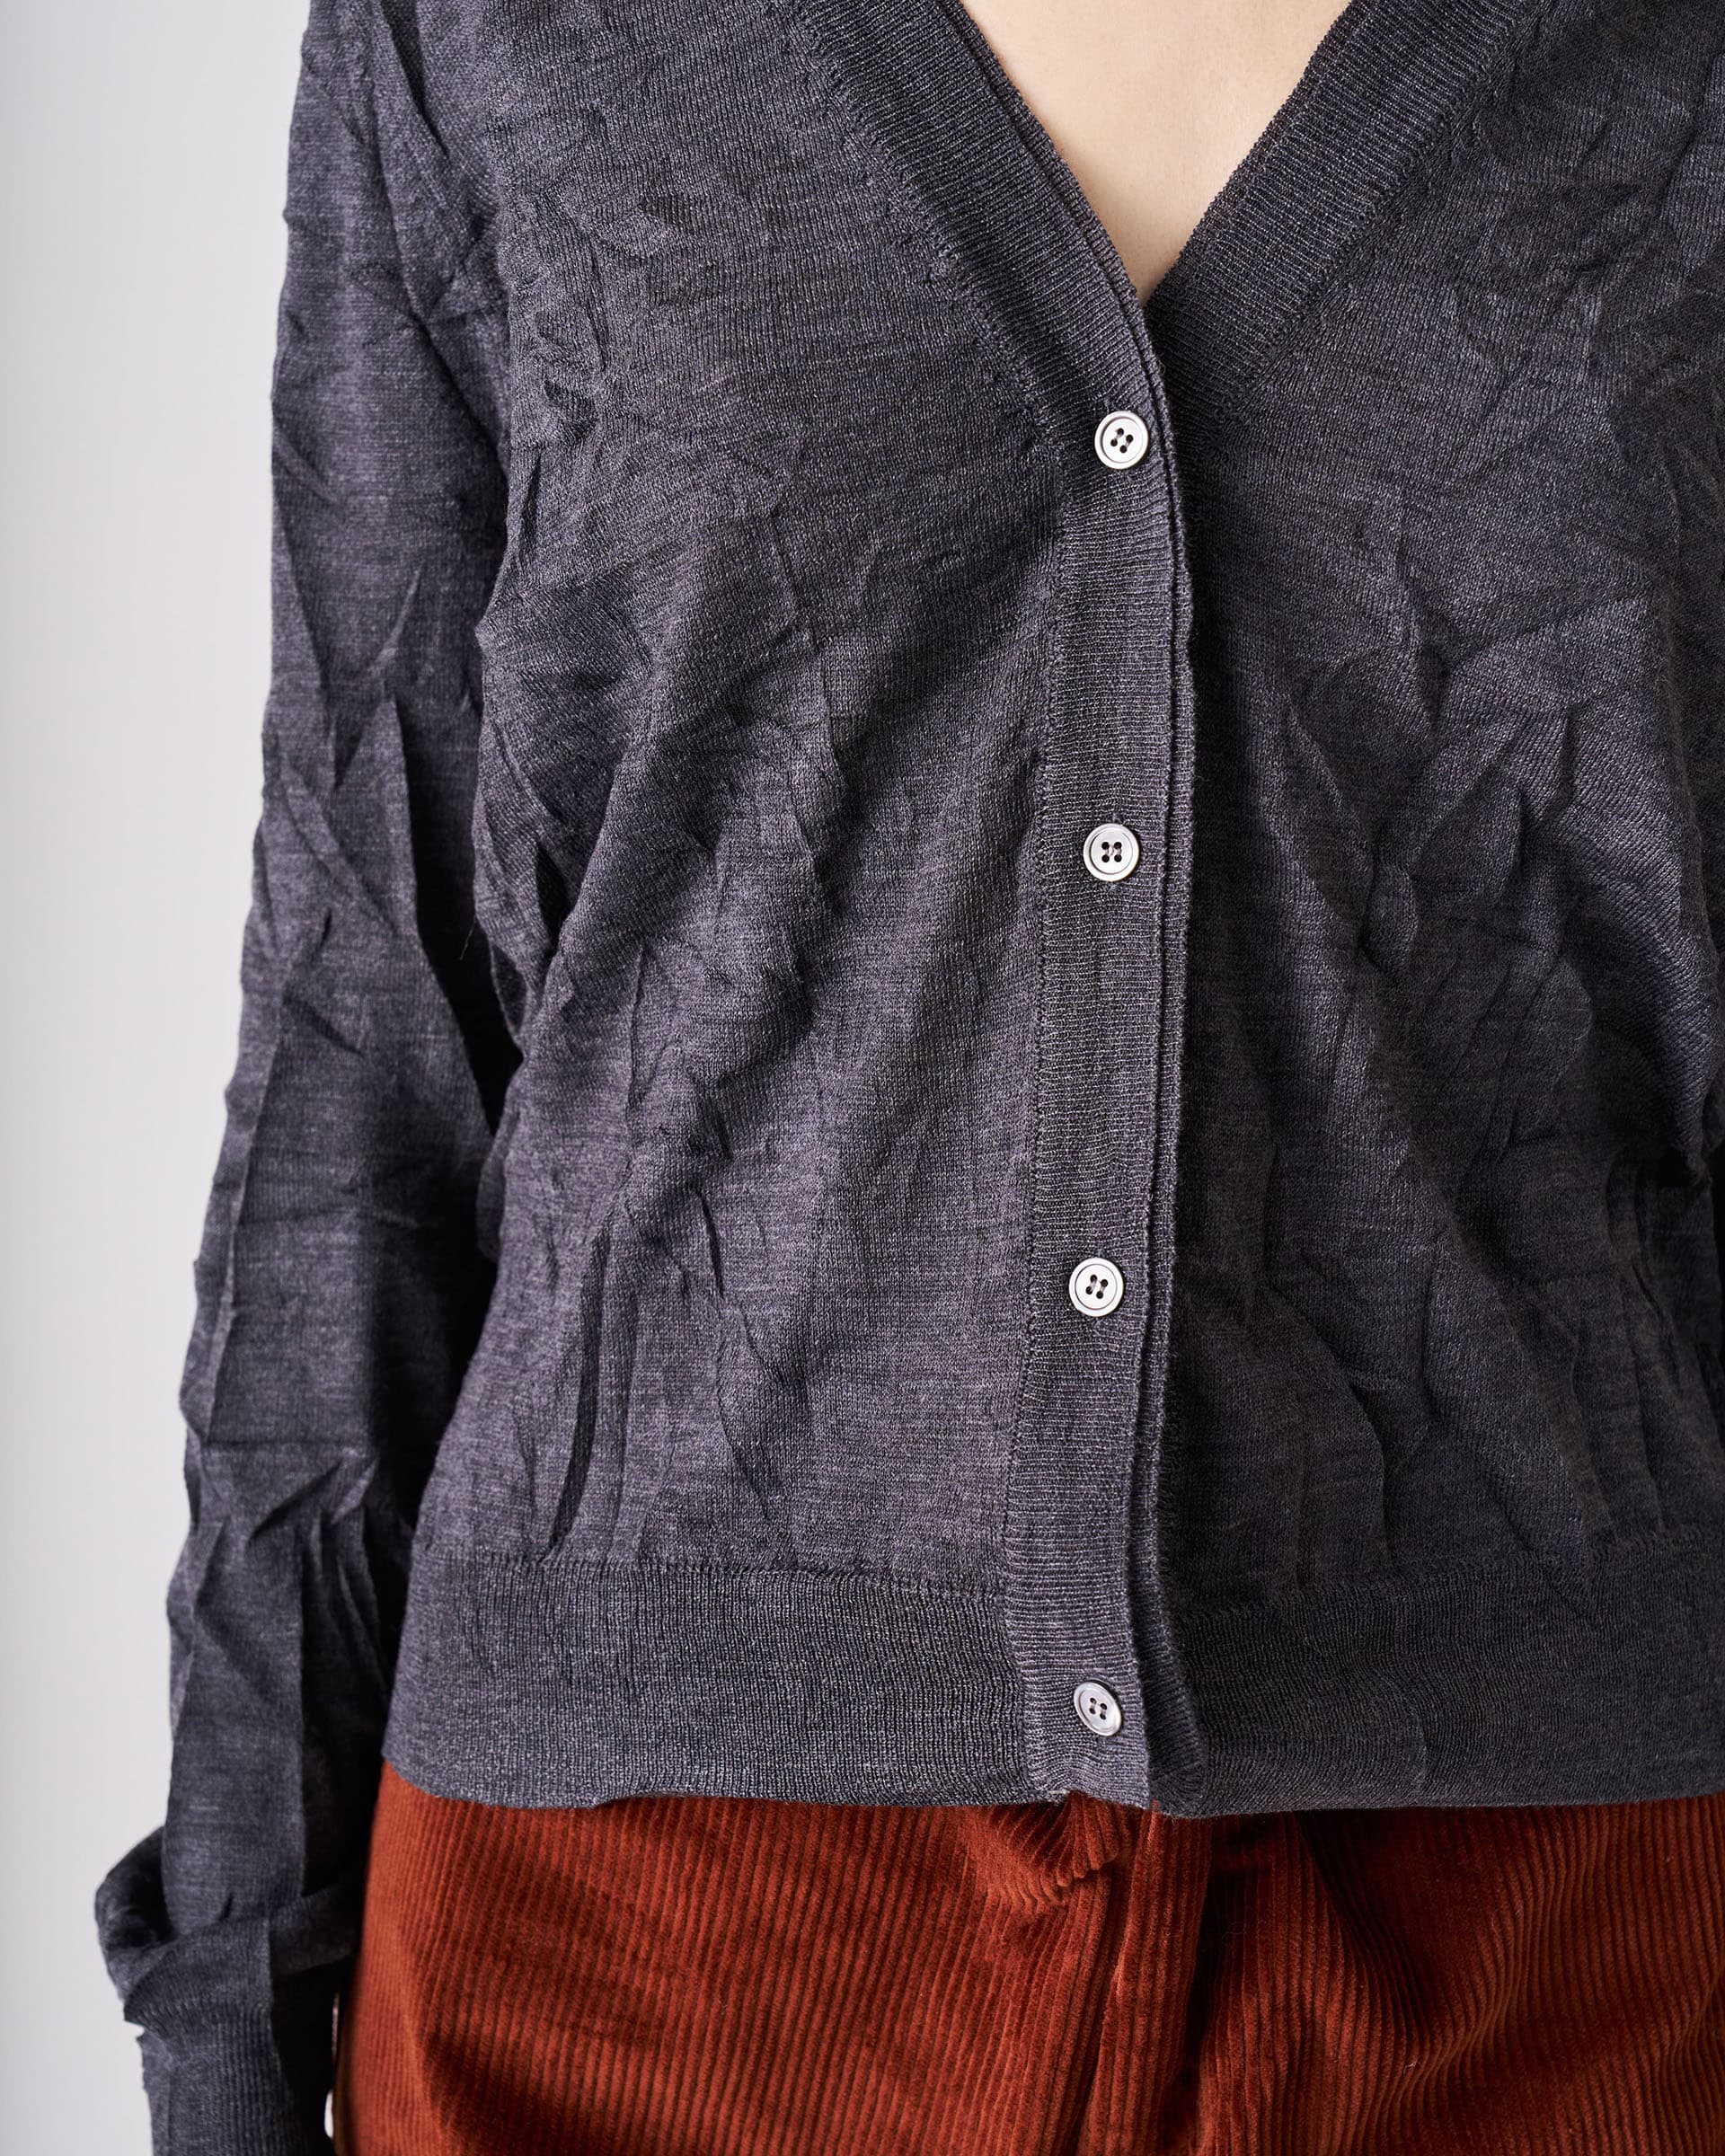 The Market Store | Wrinkled Knit Cardigan